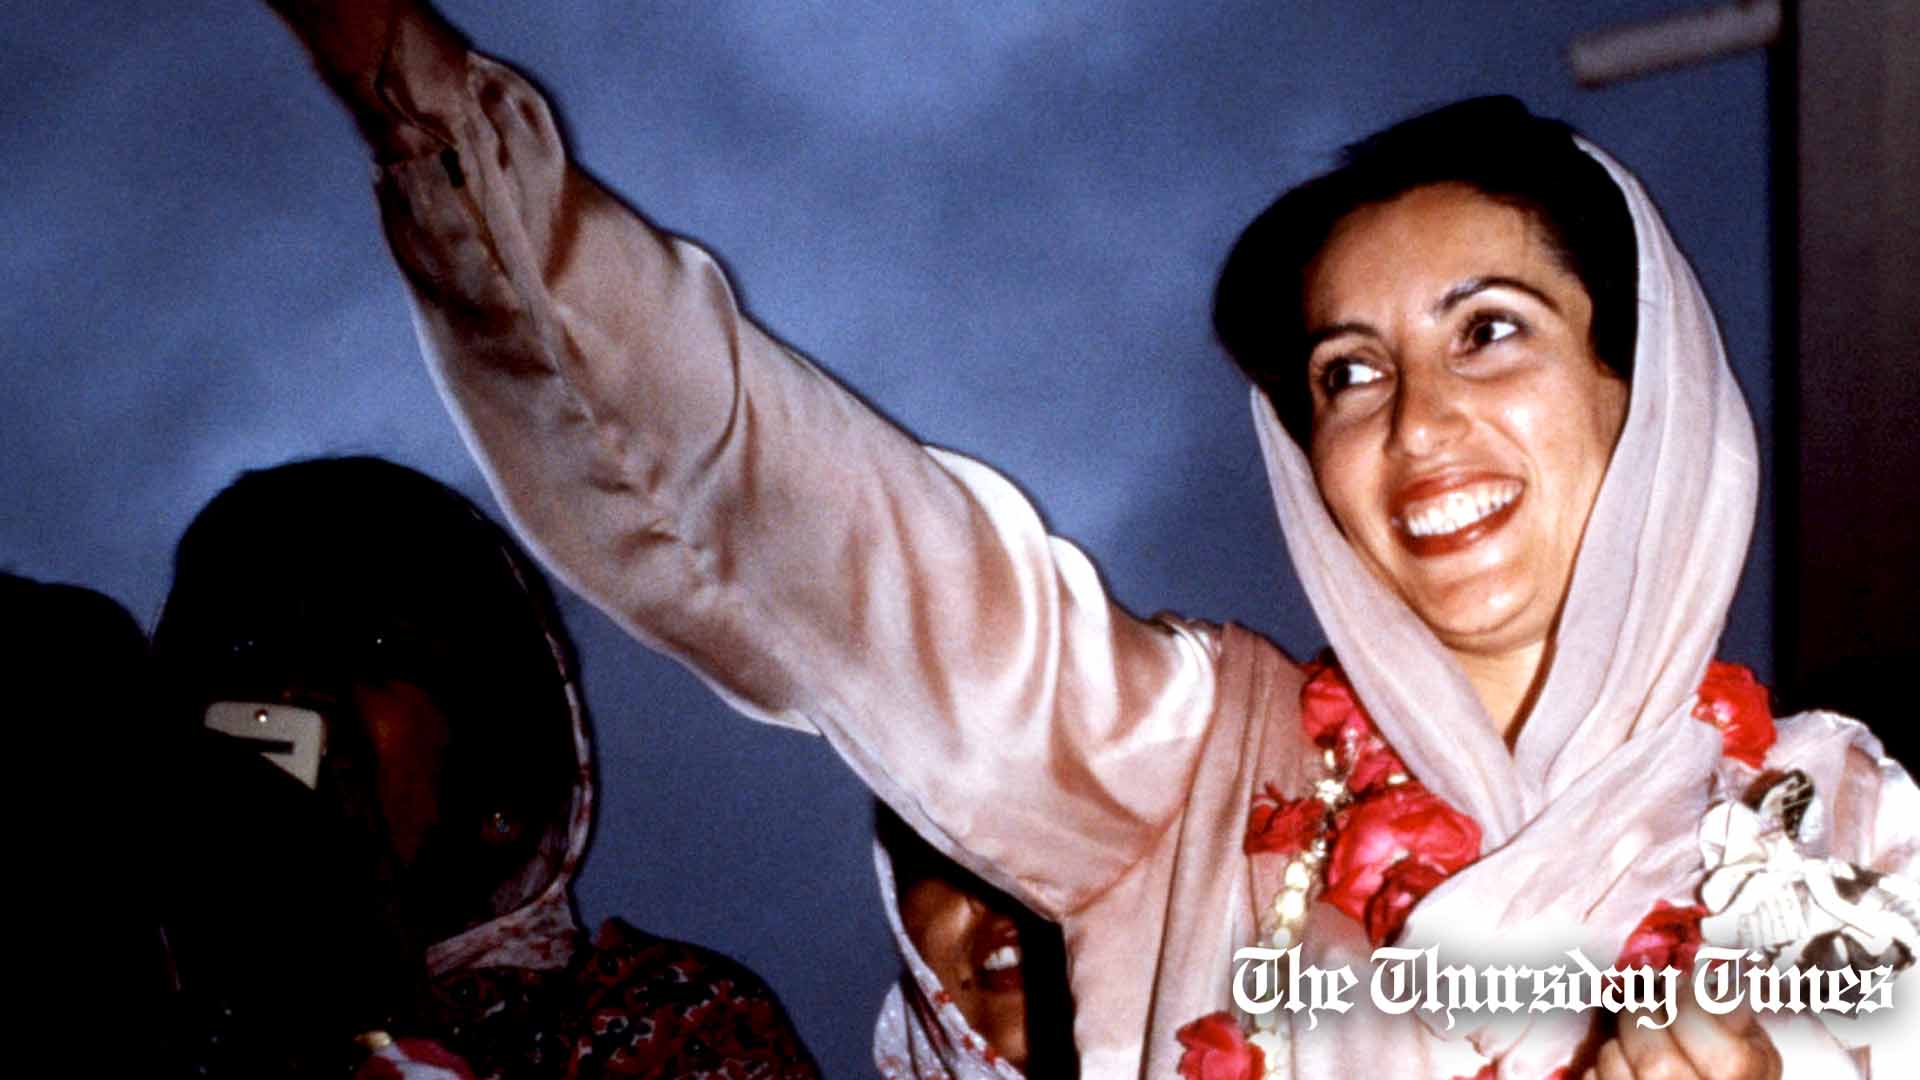 Former prime minister Benazir Bhutto is released from jail by General Zia-ul-Haq to fanfare from the Pakistan People's Party on September 9, 1986. — GAMMA-RAPHO/THE THURSDAY TIMES